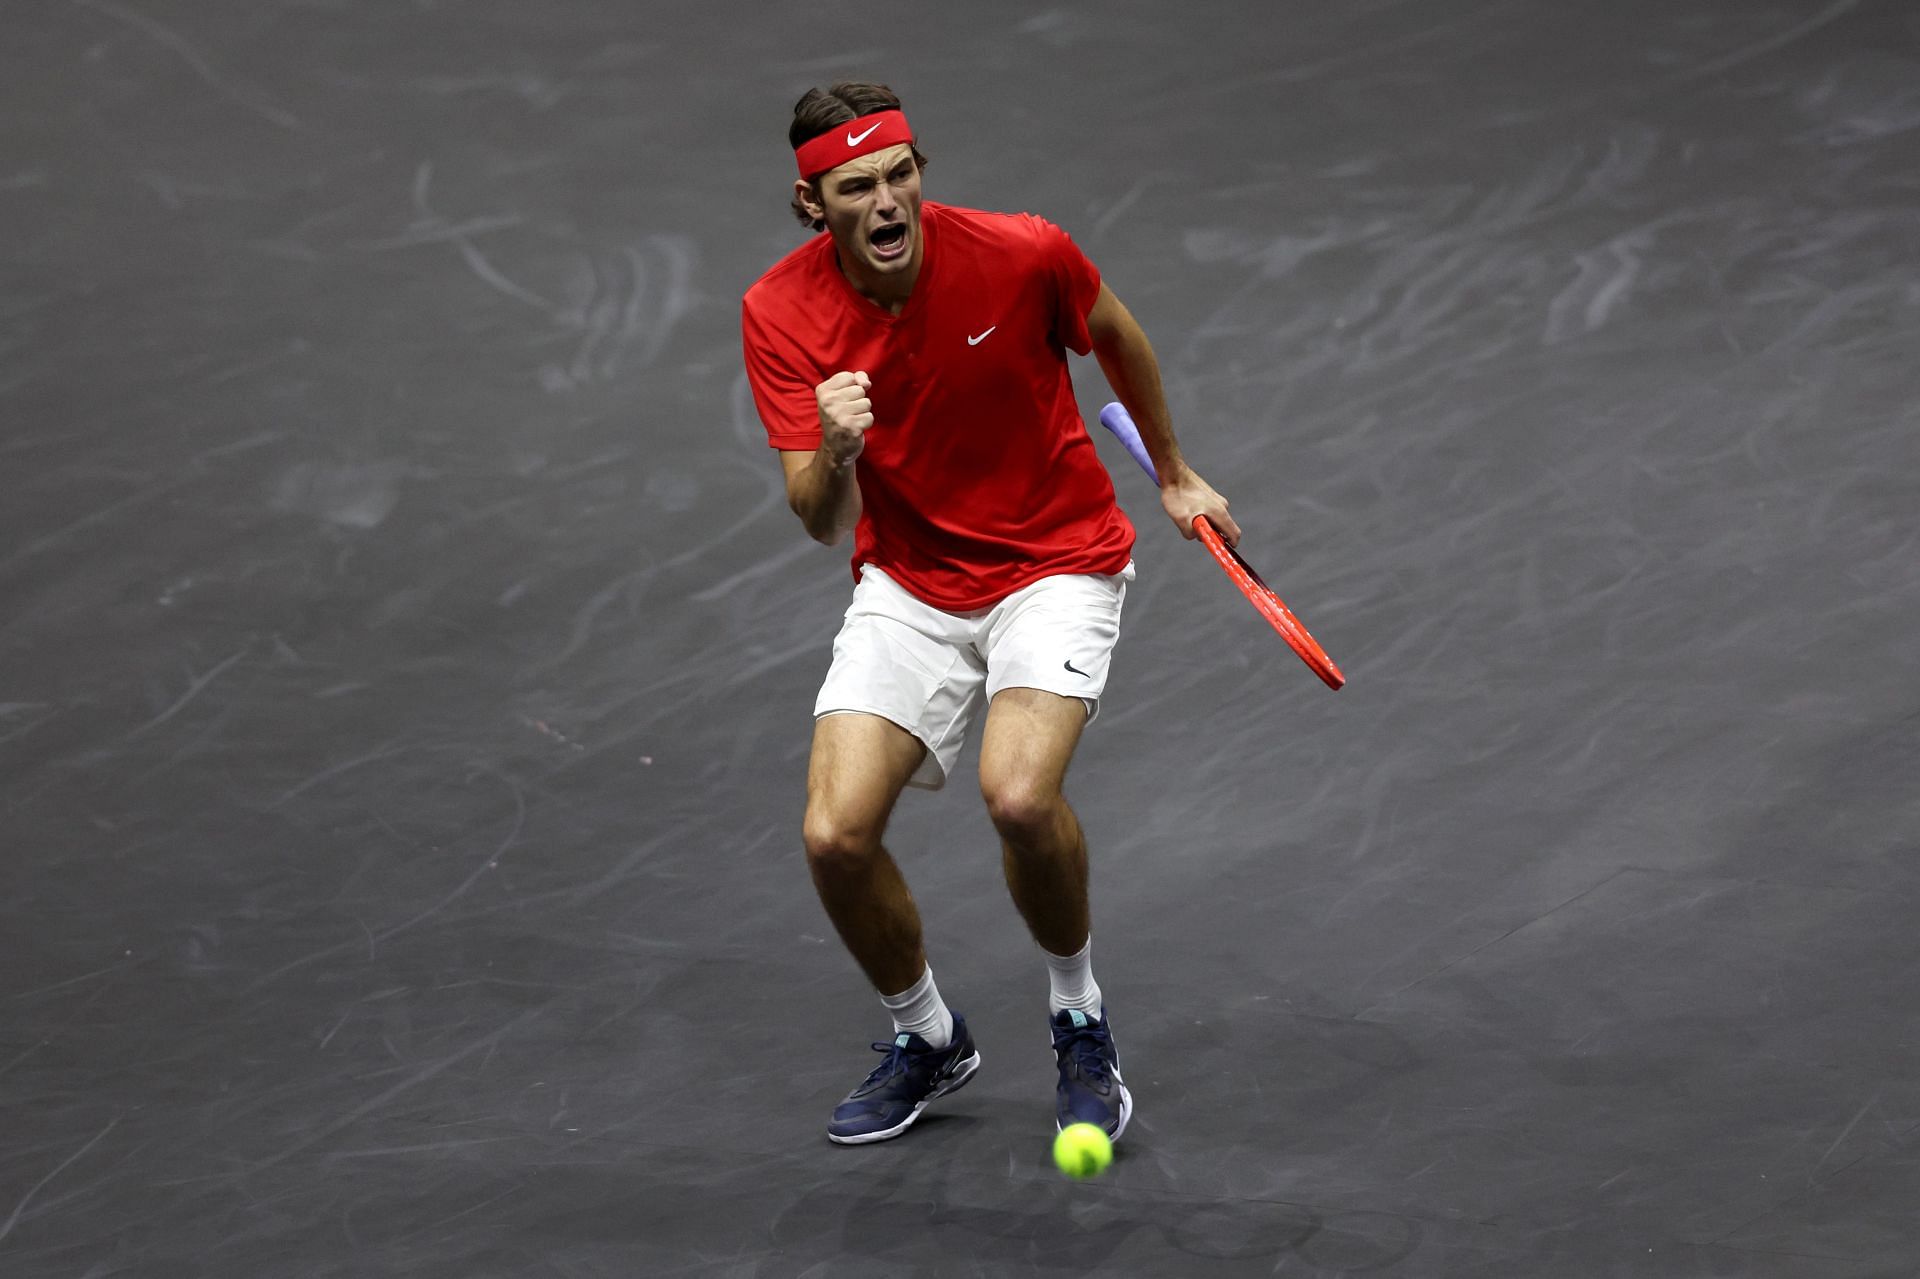 Taylor Fritz at the 2022 Laver Cup.